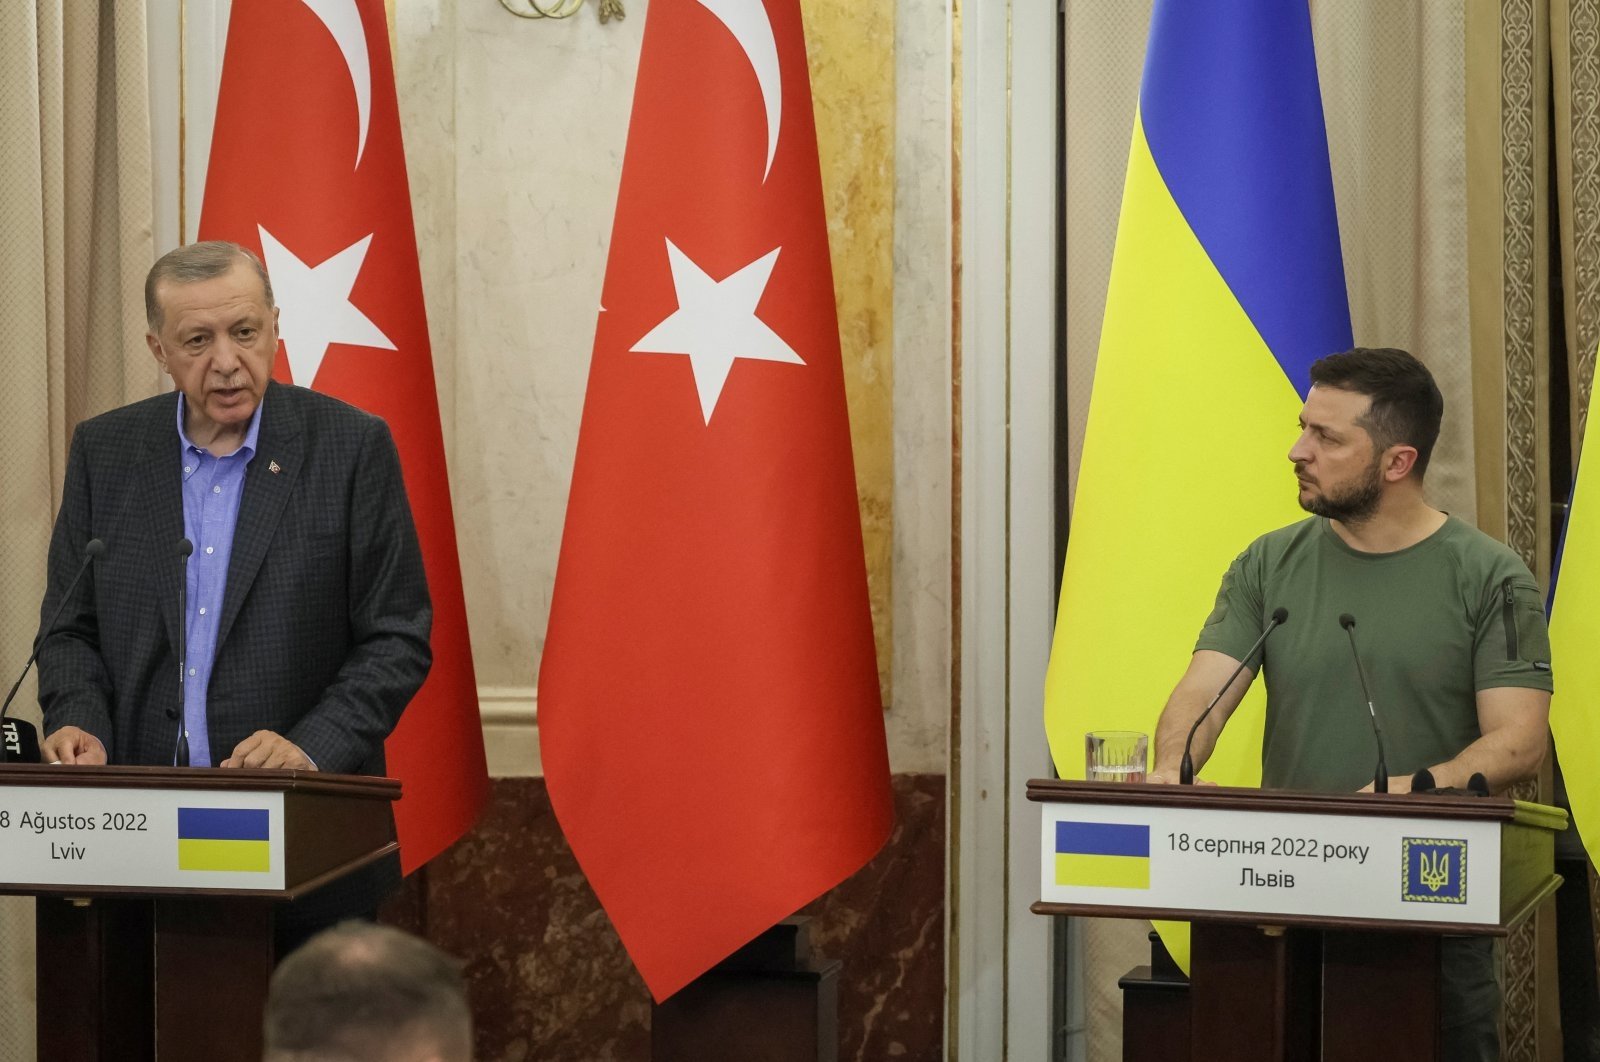 President Recep Tayyip Erdoğan (L), Ukrainian President Volodymyr Zelenskyy (R) and U.N. Secretary-General Antonio Guterres (not pictured) attend a joint news conference following their meeting in Lviv, Ukraine, Aug. 18, 2022. (Reuters Photo)